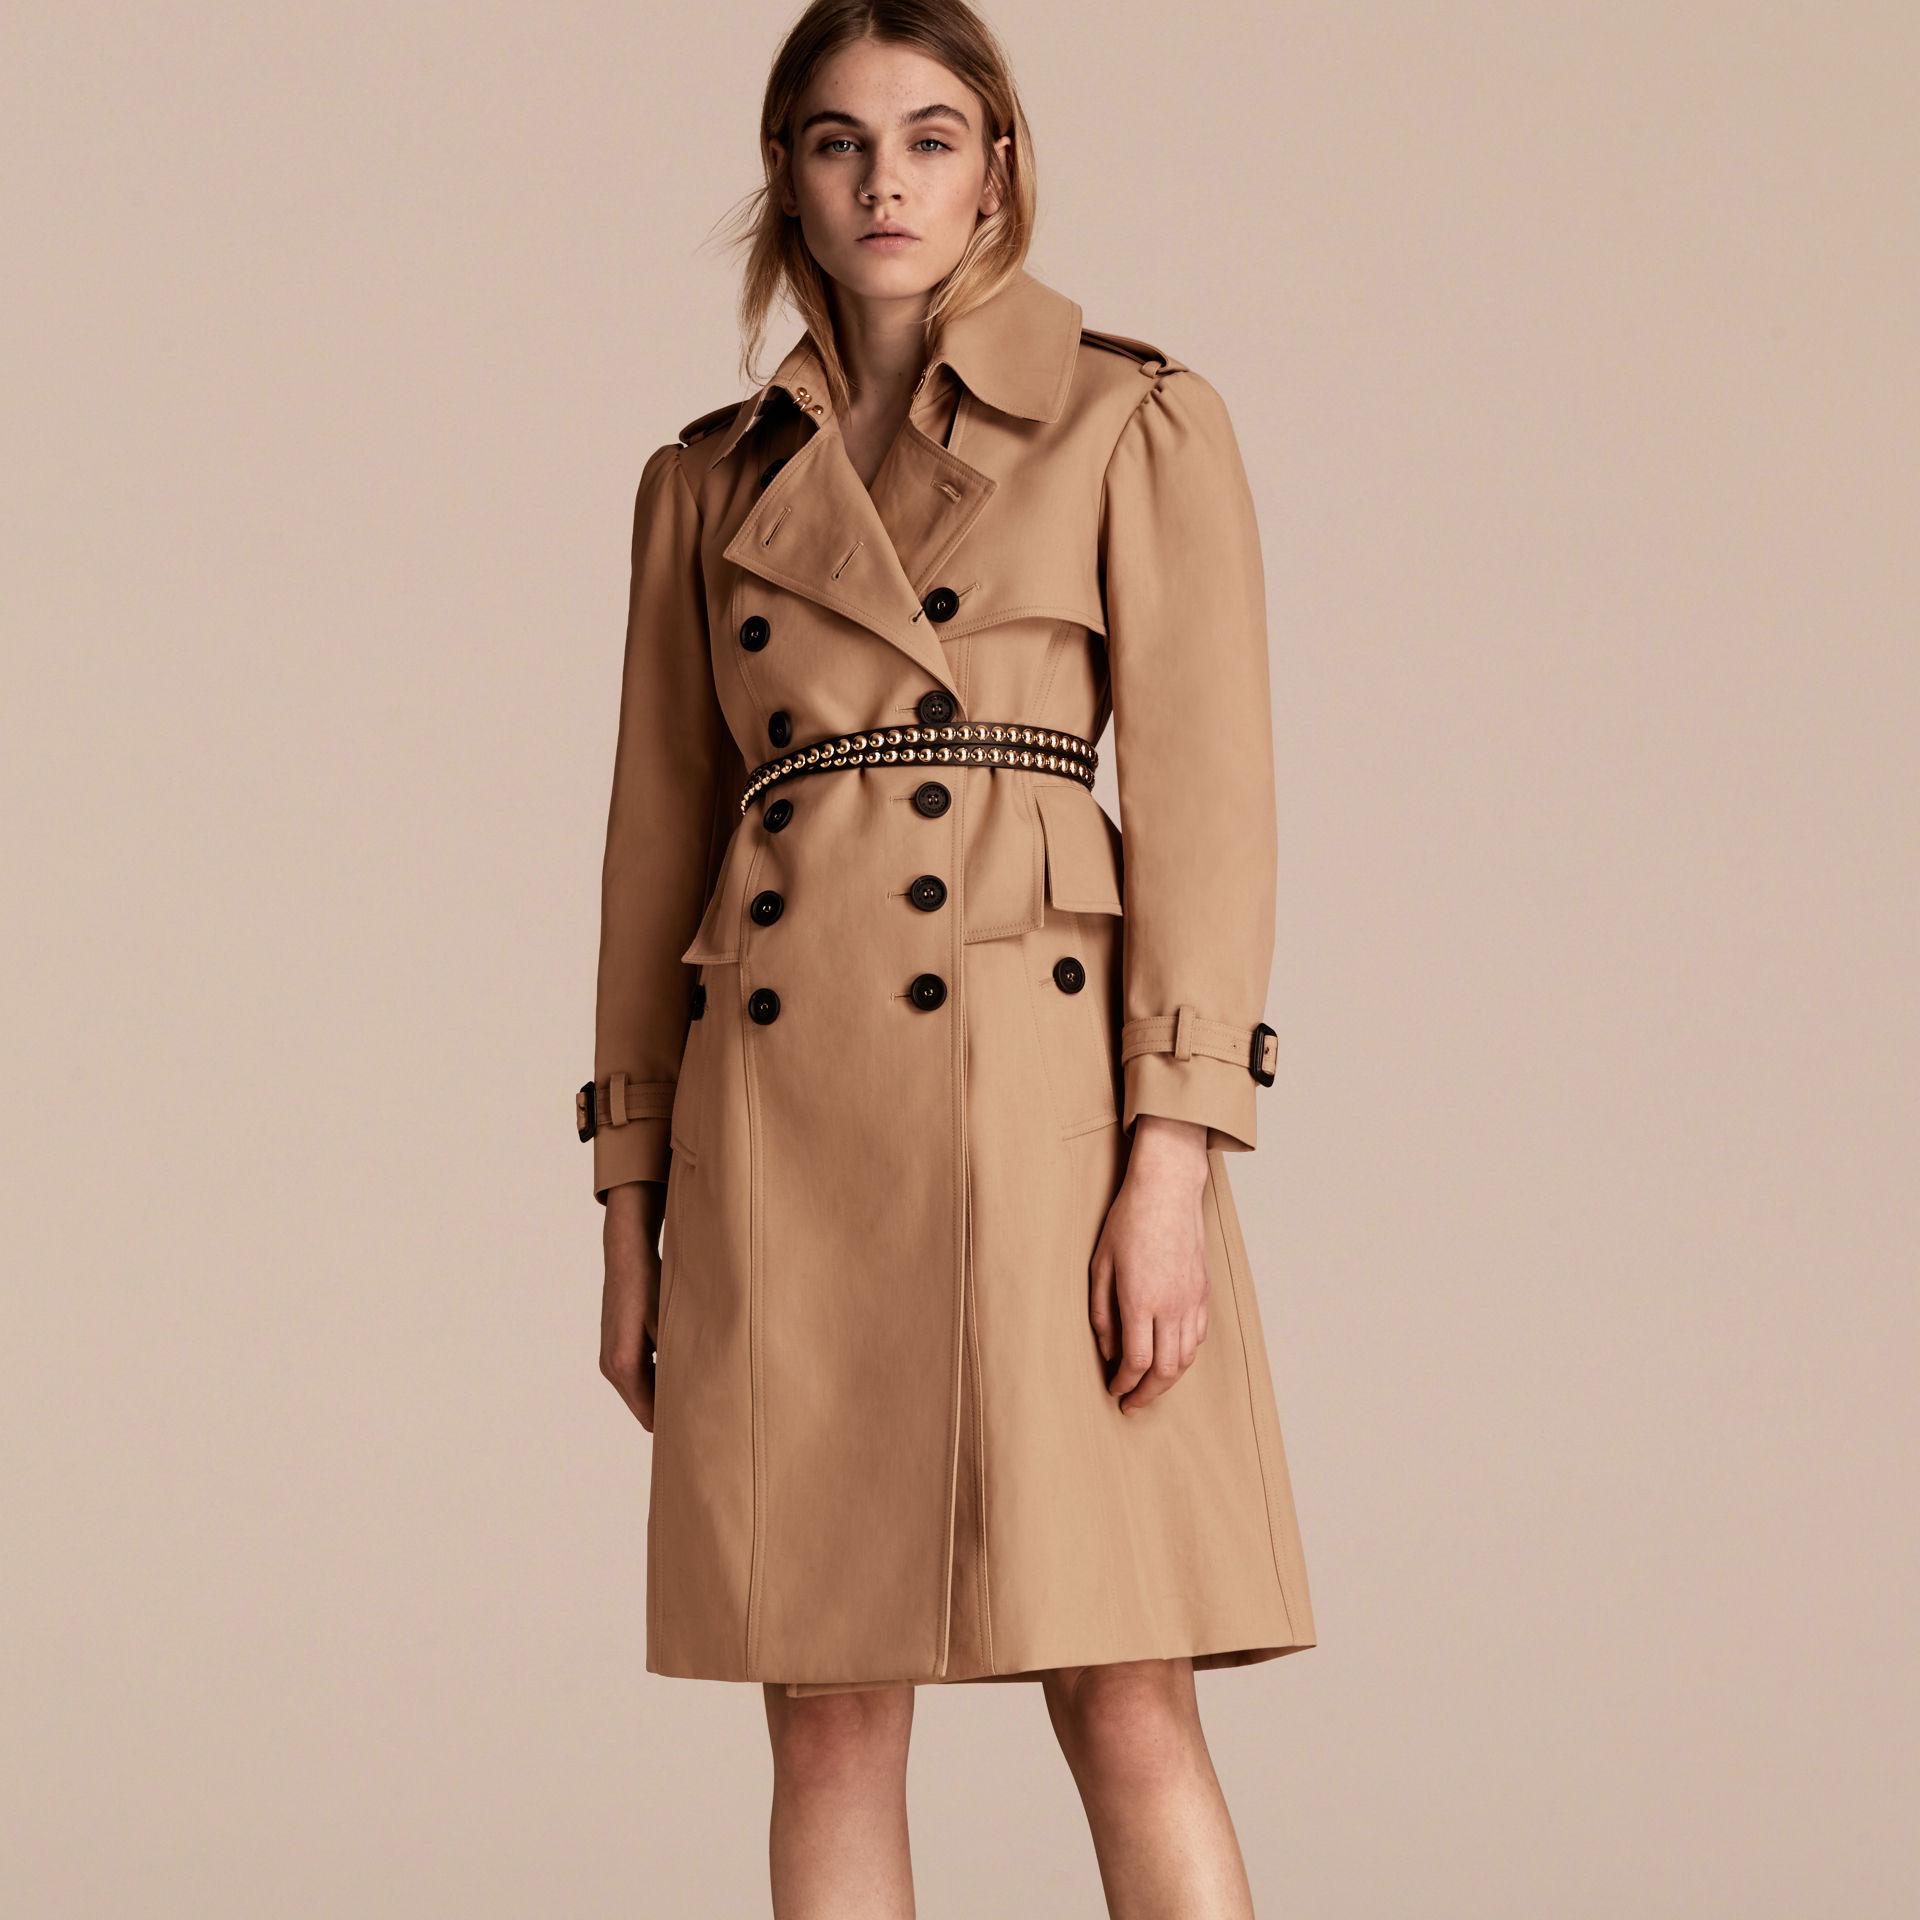 burberry 2 – Chic Every Week